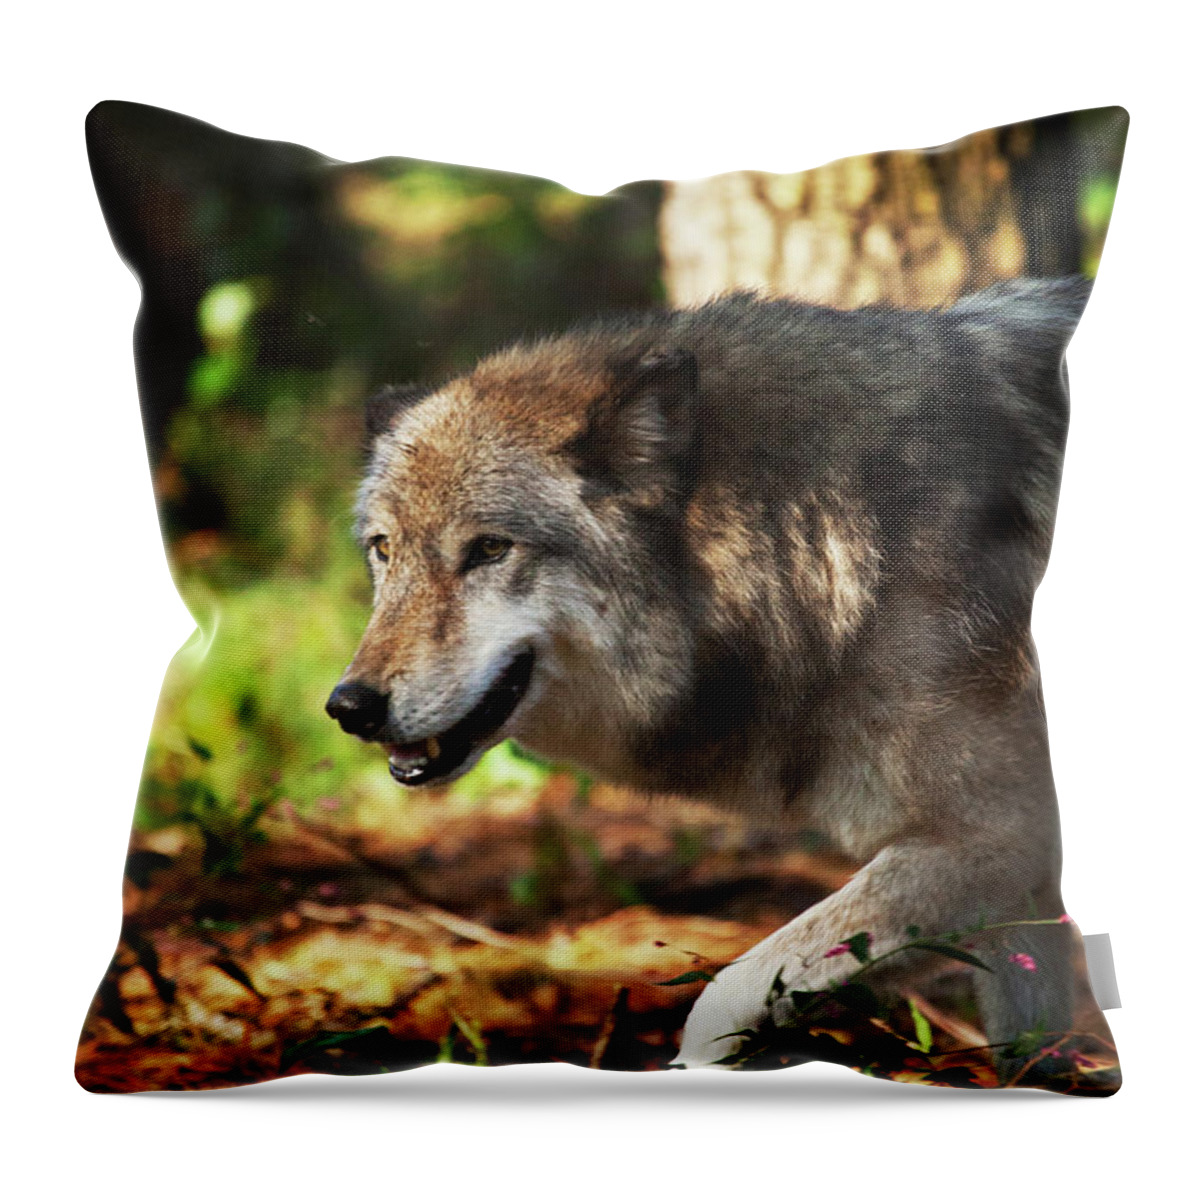 Wolf Throw Pillow featuring the photograph The Gray Wolf by Karol Livote